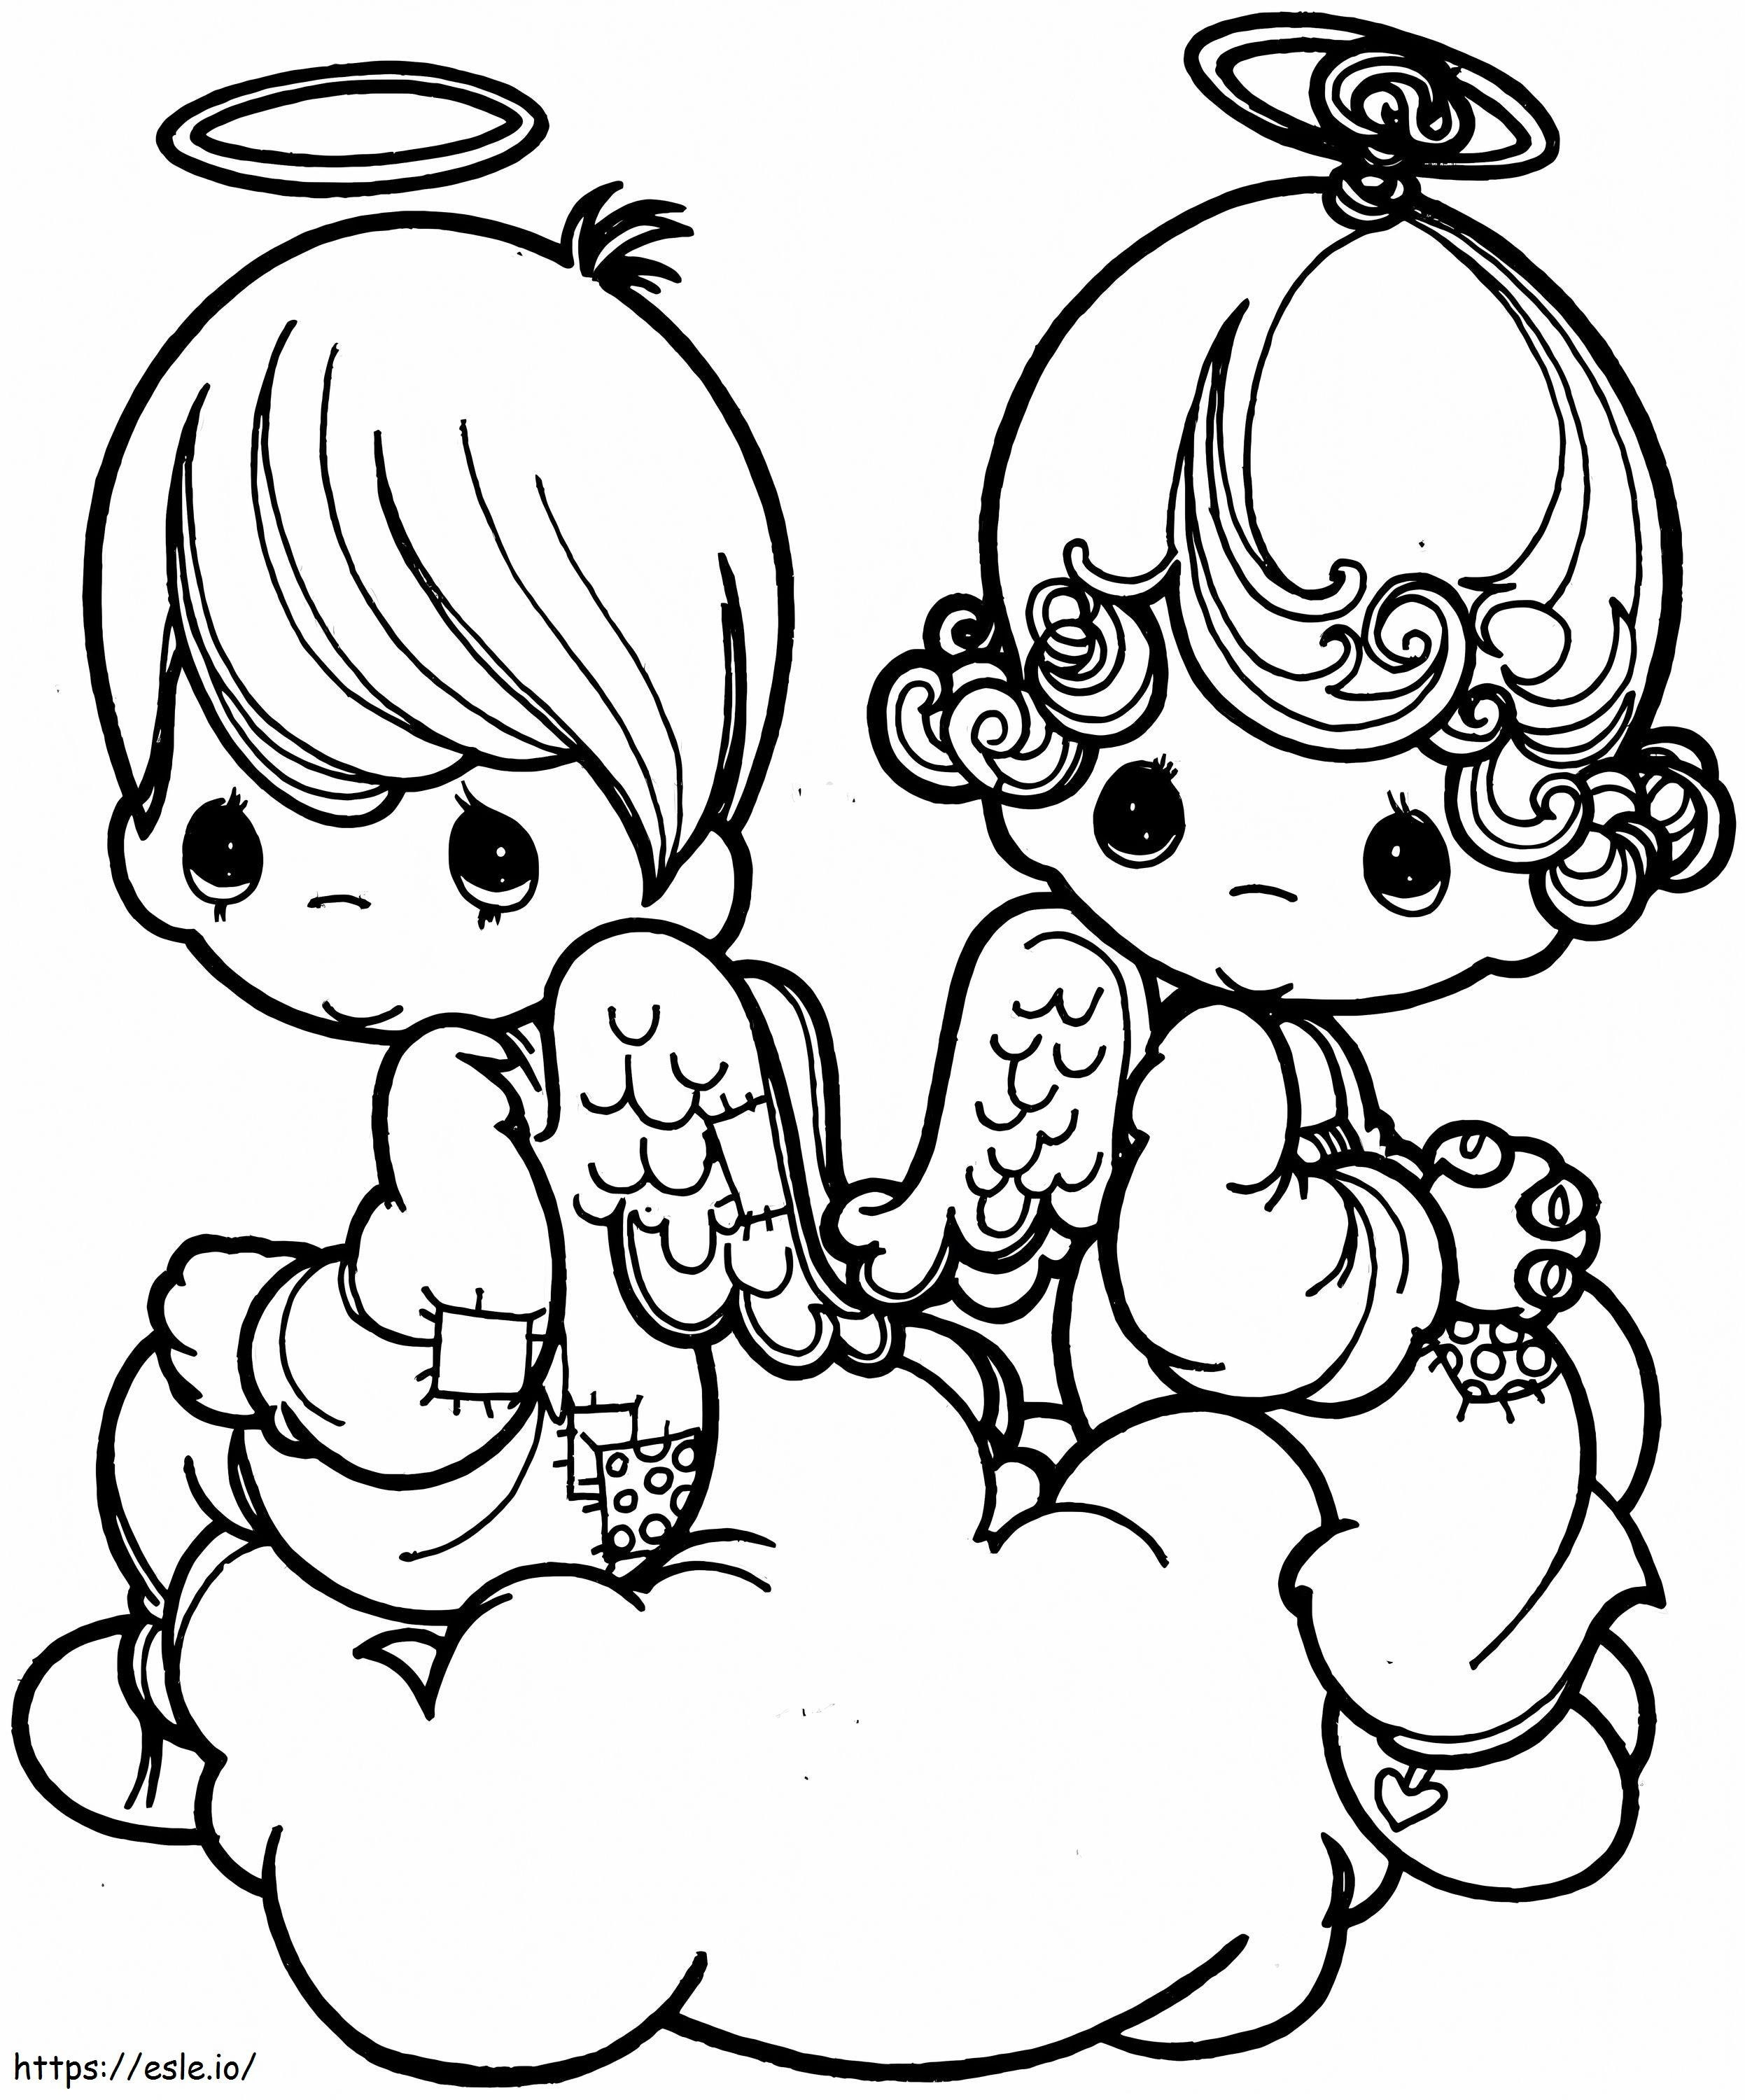 Girl And Boy Cupid Sitting coloring page